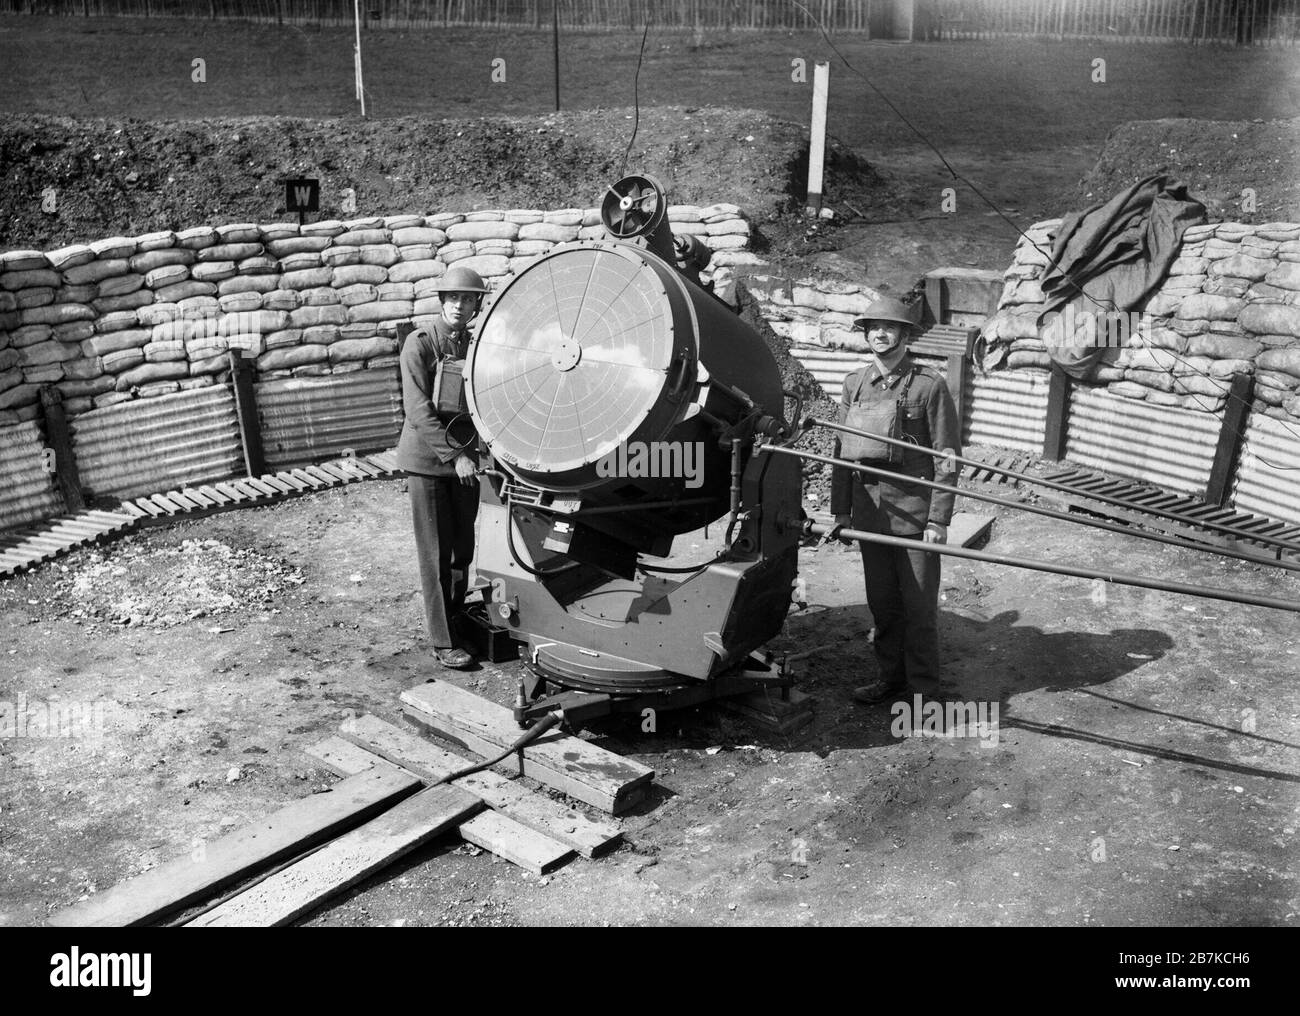 An anti-aircraft searchlight and crew at the Royal Hospital at Chelsea in London, 17 April 1940. Anti-aircraft searchlight and crew at the Royal Hospital at Chelsea in London, 17 April 1940. This is the 90mm model. The tube at the top of the light is a fan that cools the interior. Stock Photo